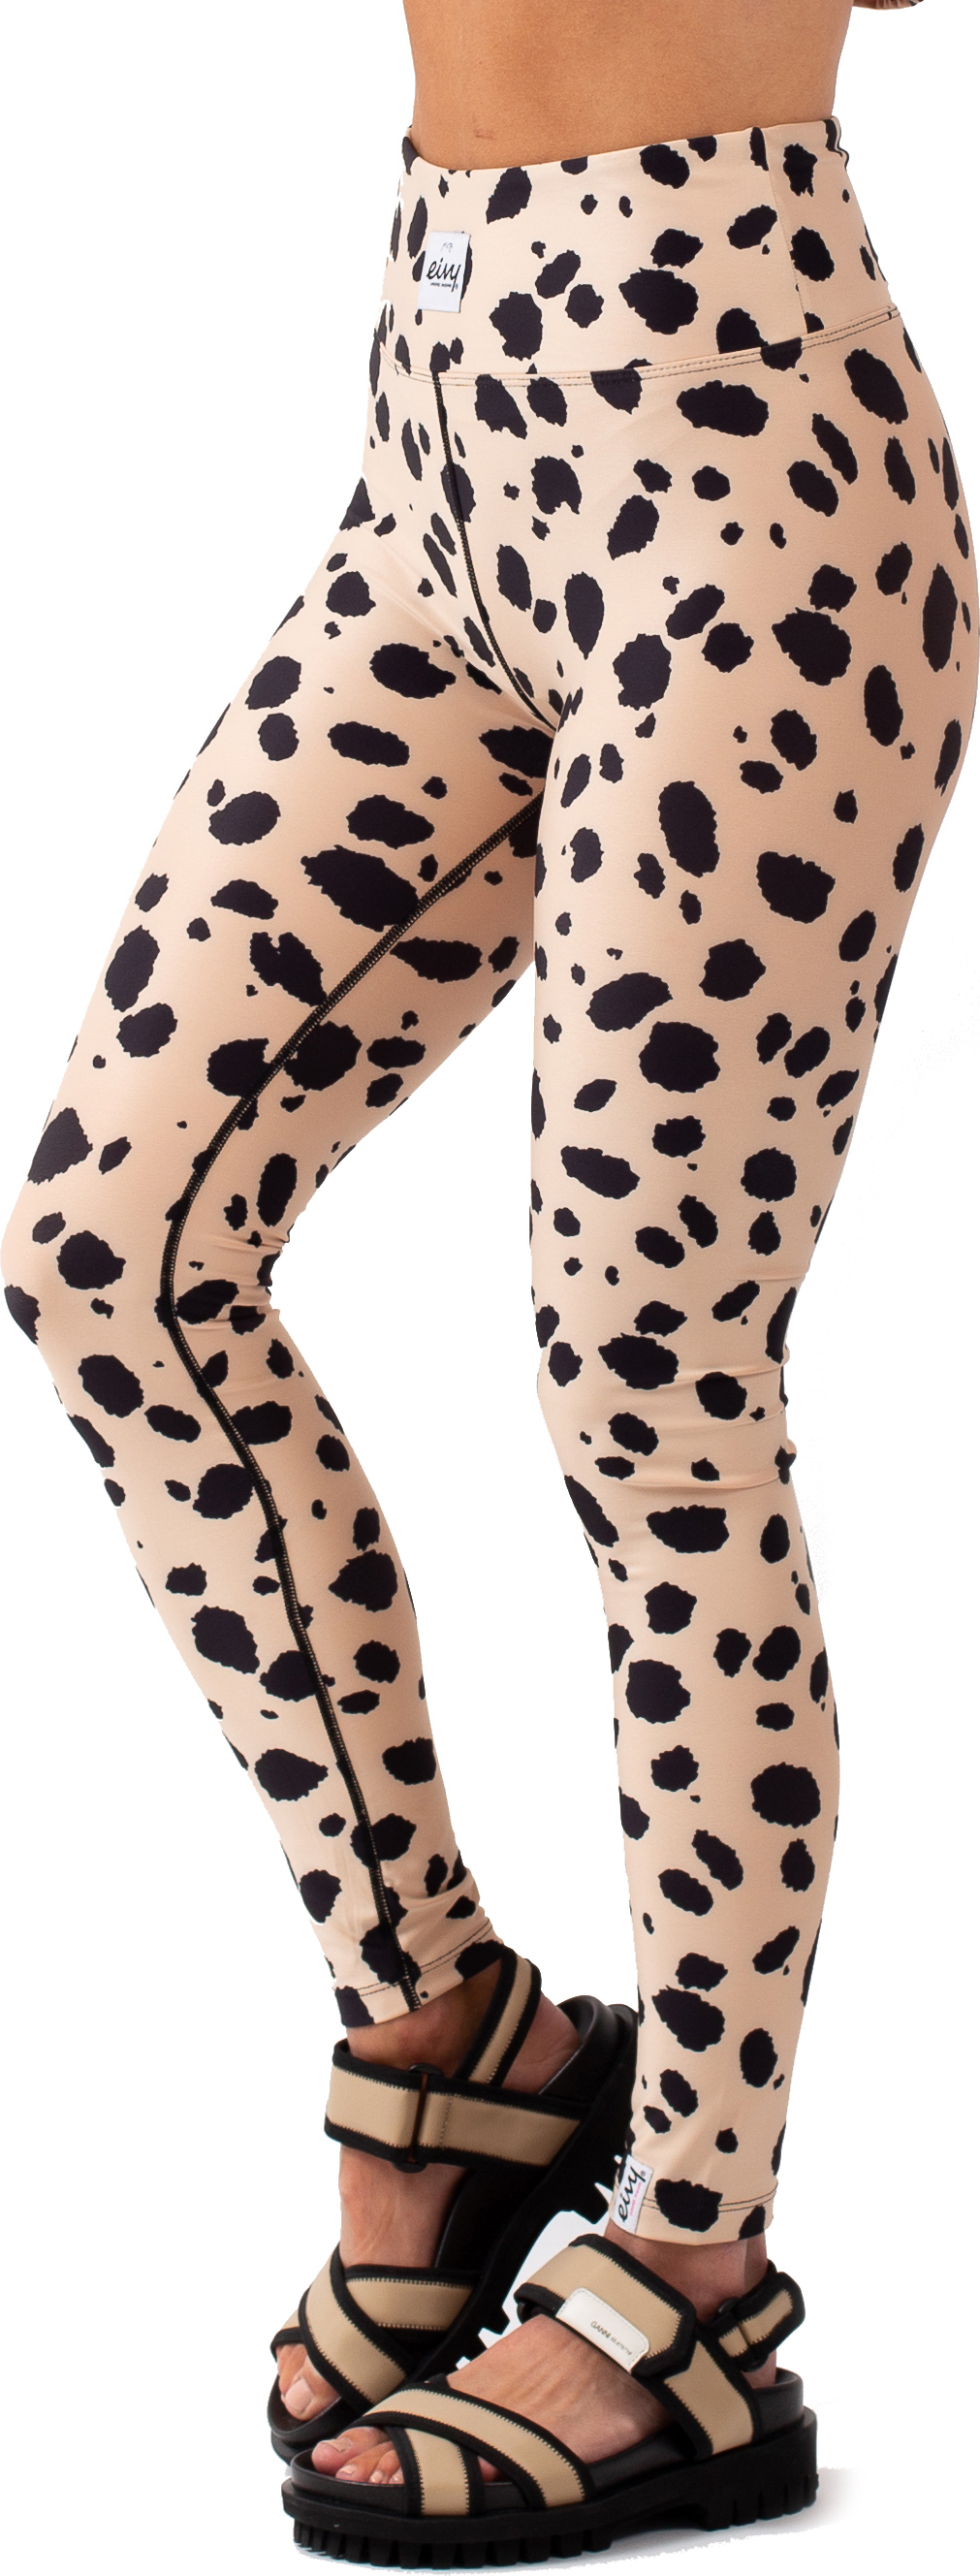 Women's Icecold Tights Cheetah  Buy Women's Icecold Tights